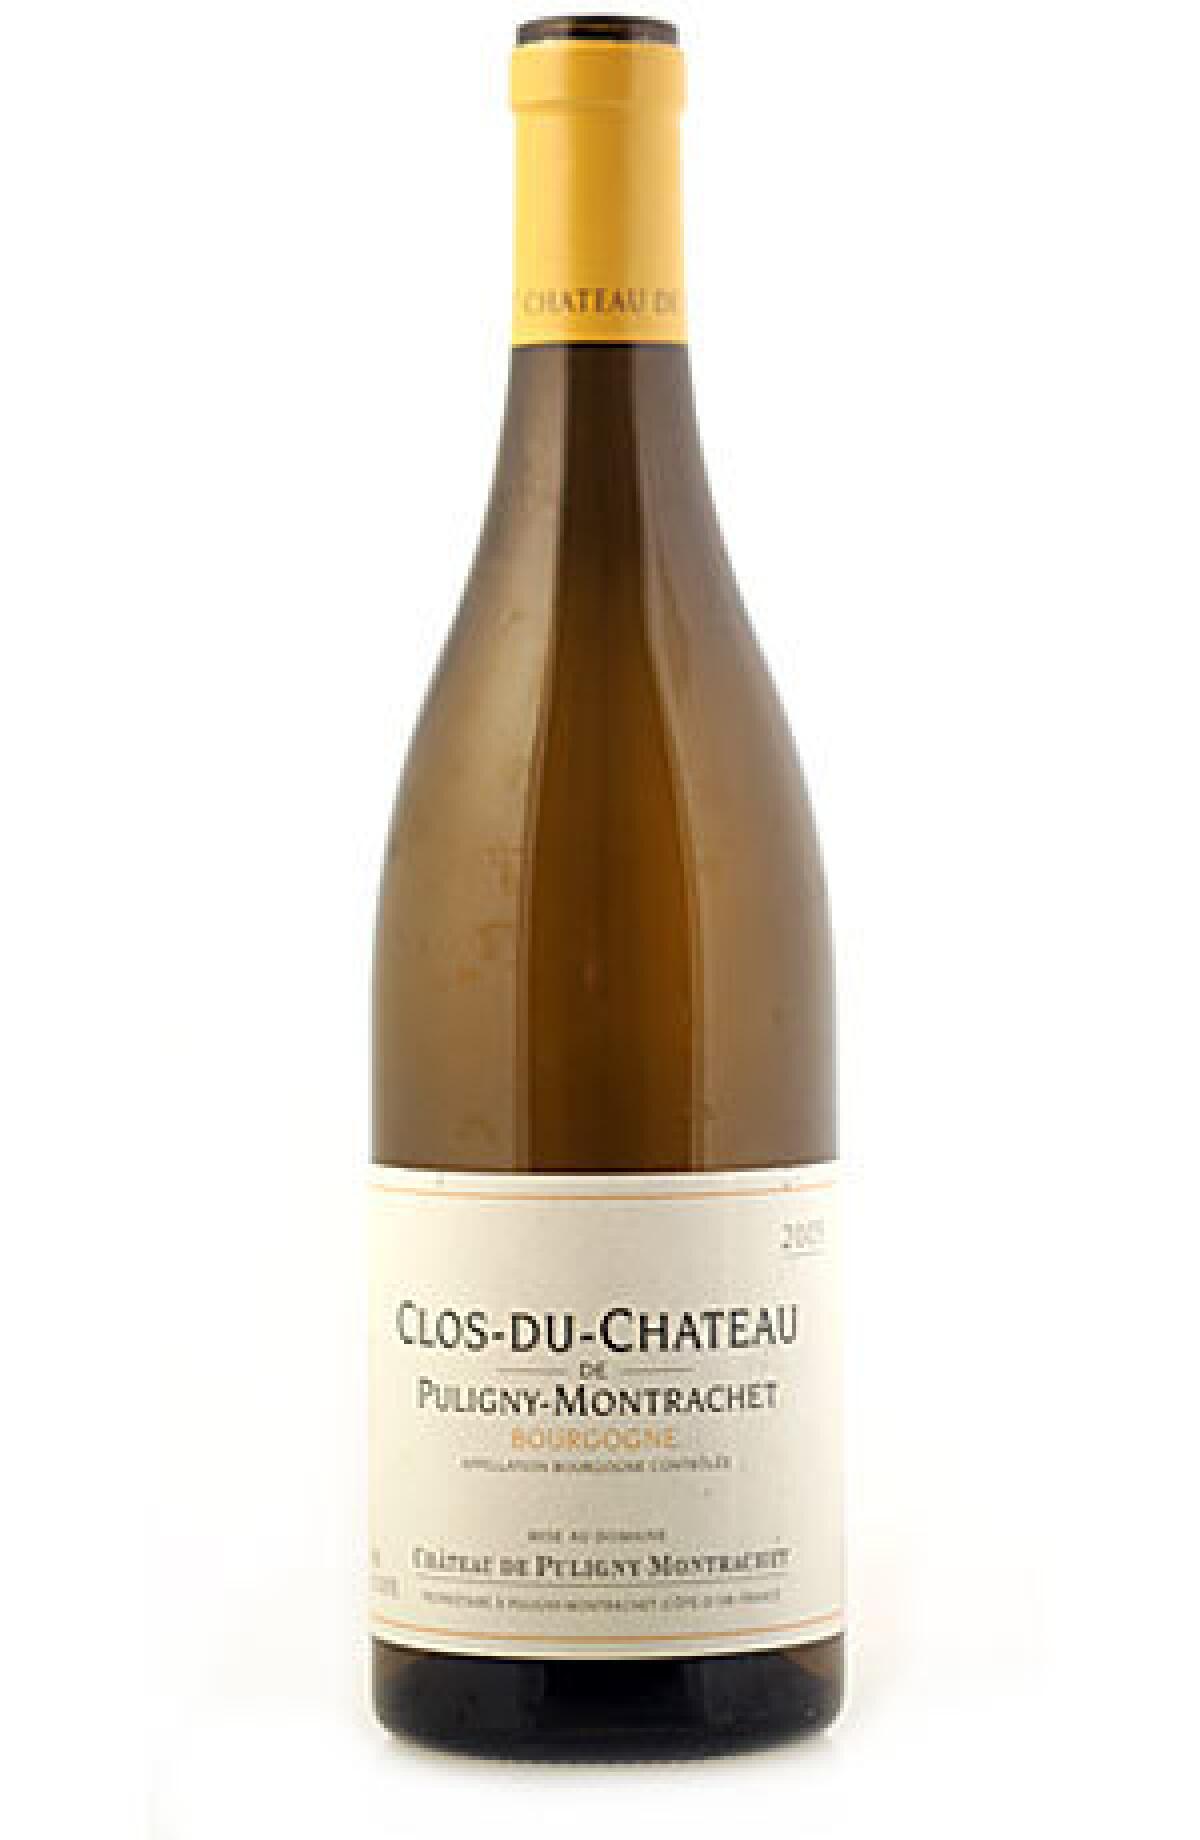 WINE OF THE WEEK: 2005 Puligny-Montrachet "Clos du Chateau" from the Chateau de Puligny-Montrachet. Click here for details.